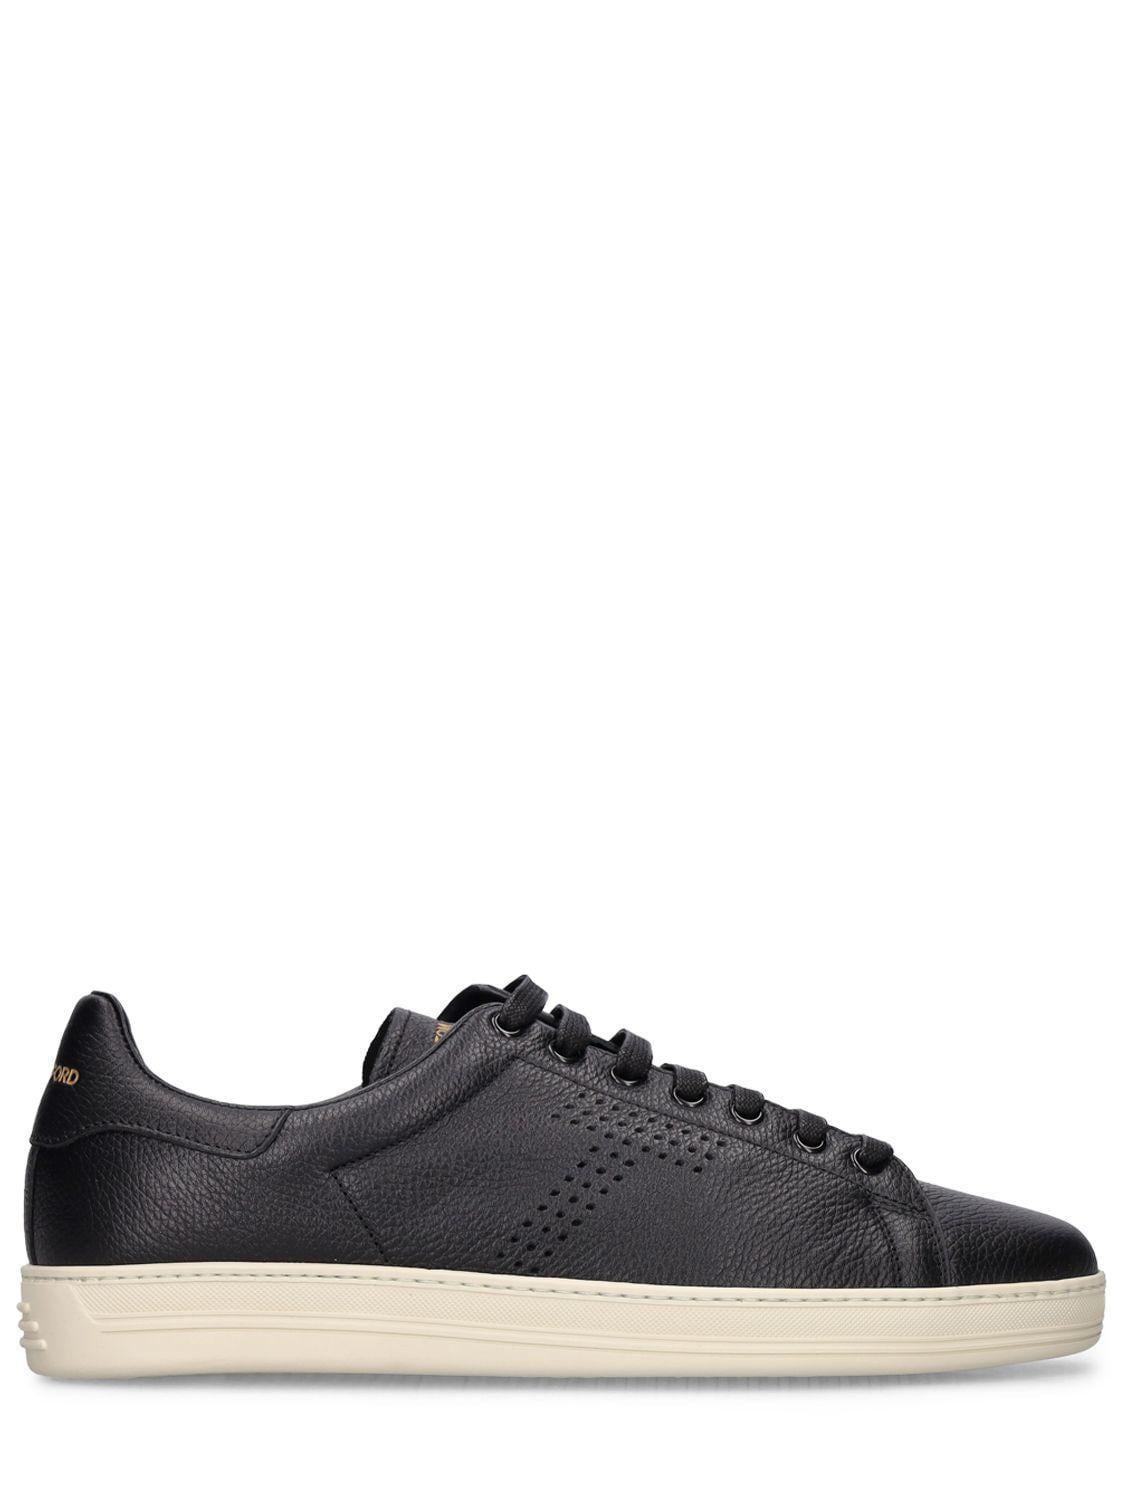 Tom Ford Grain Leather Low Top Sneakers in Black for Men | Lyst